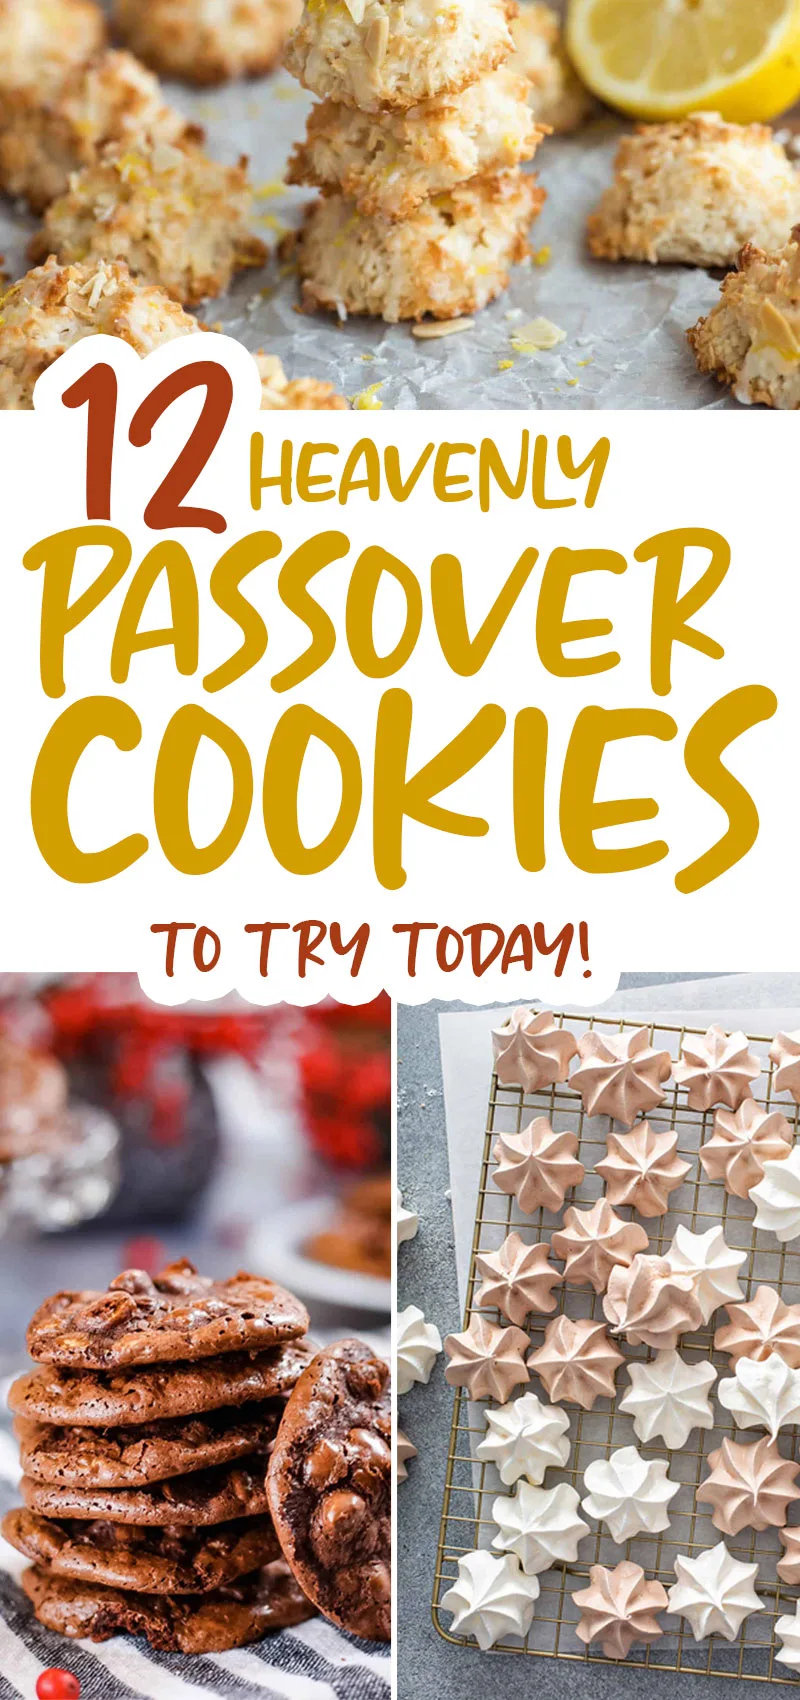 recipes for passover cookies hero collage